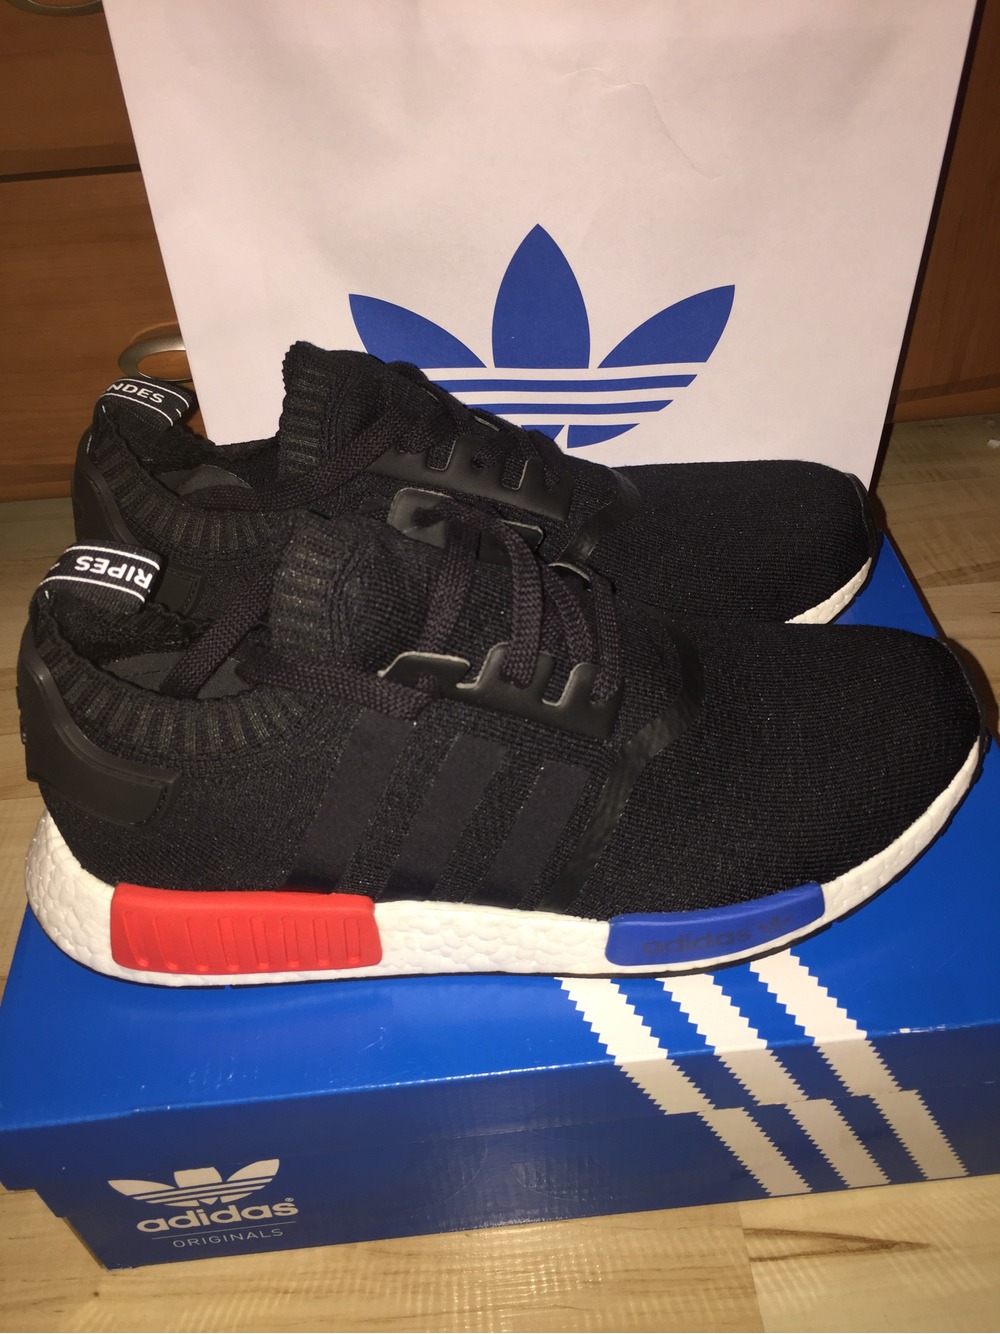 nmd r1 size 5